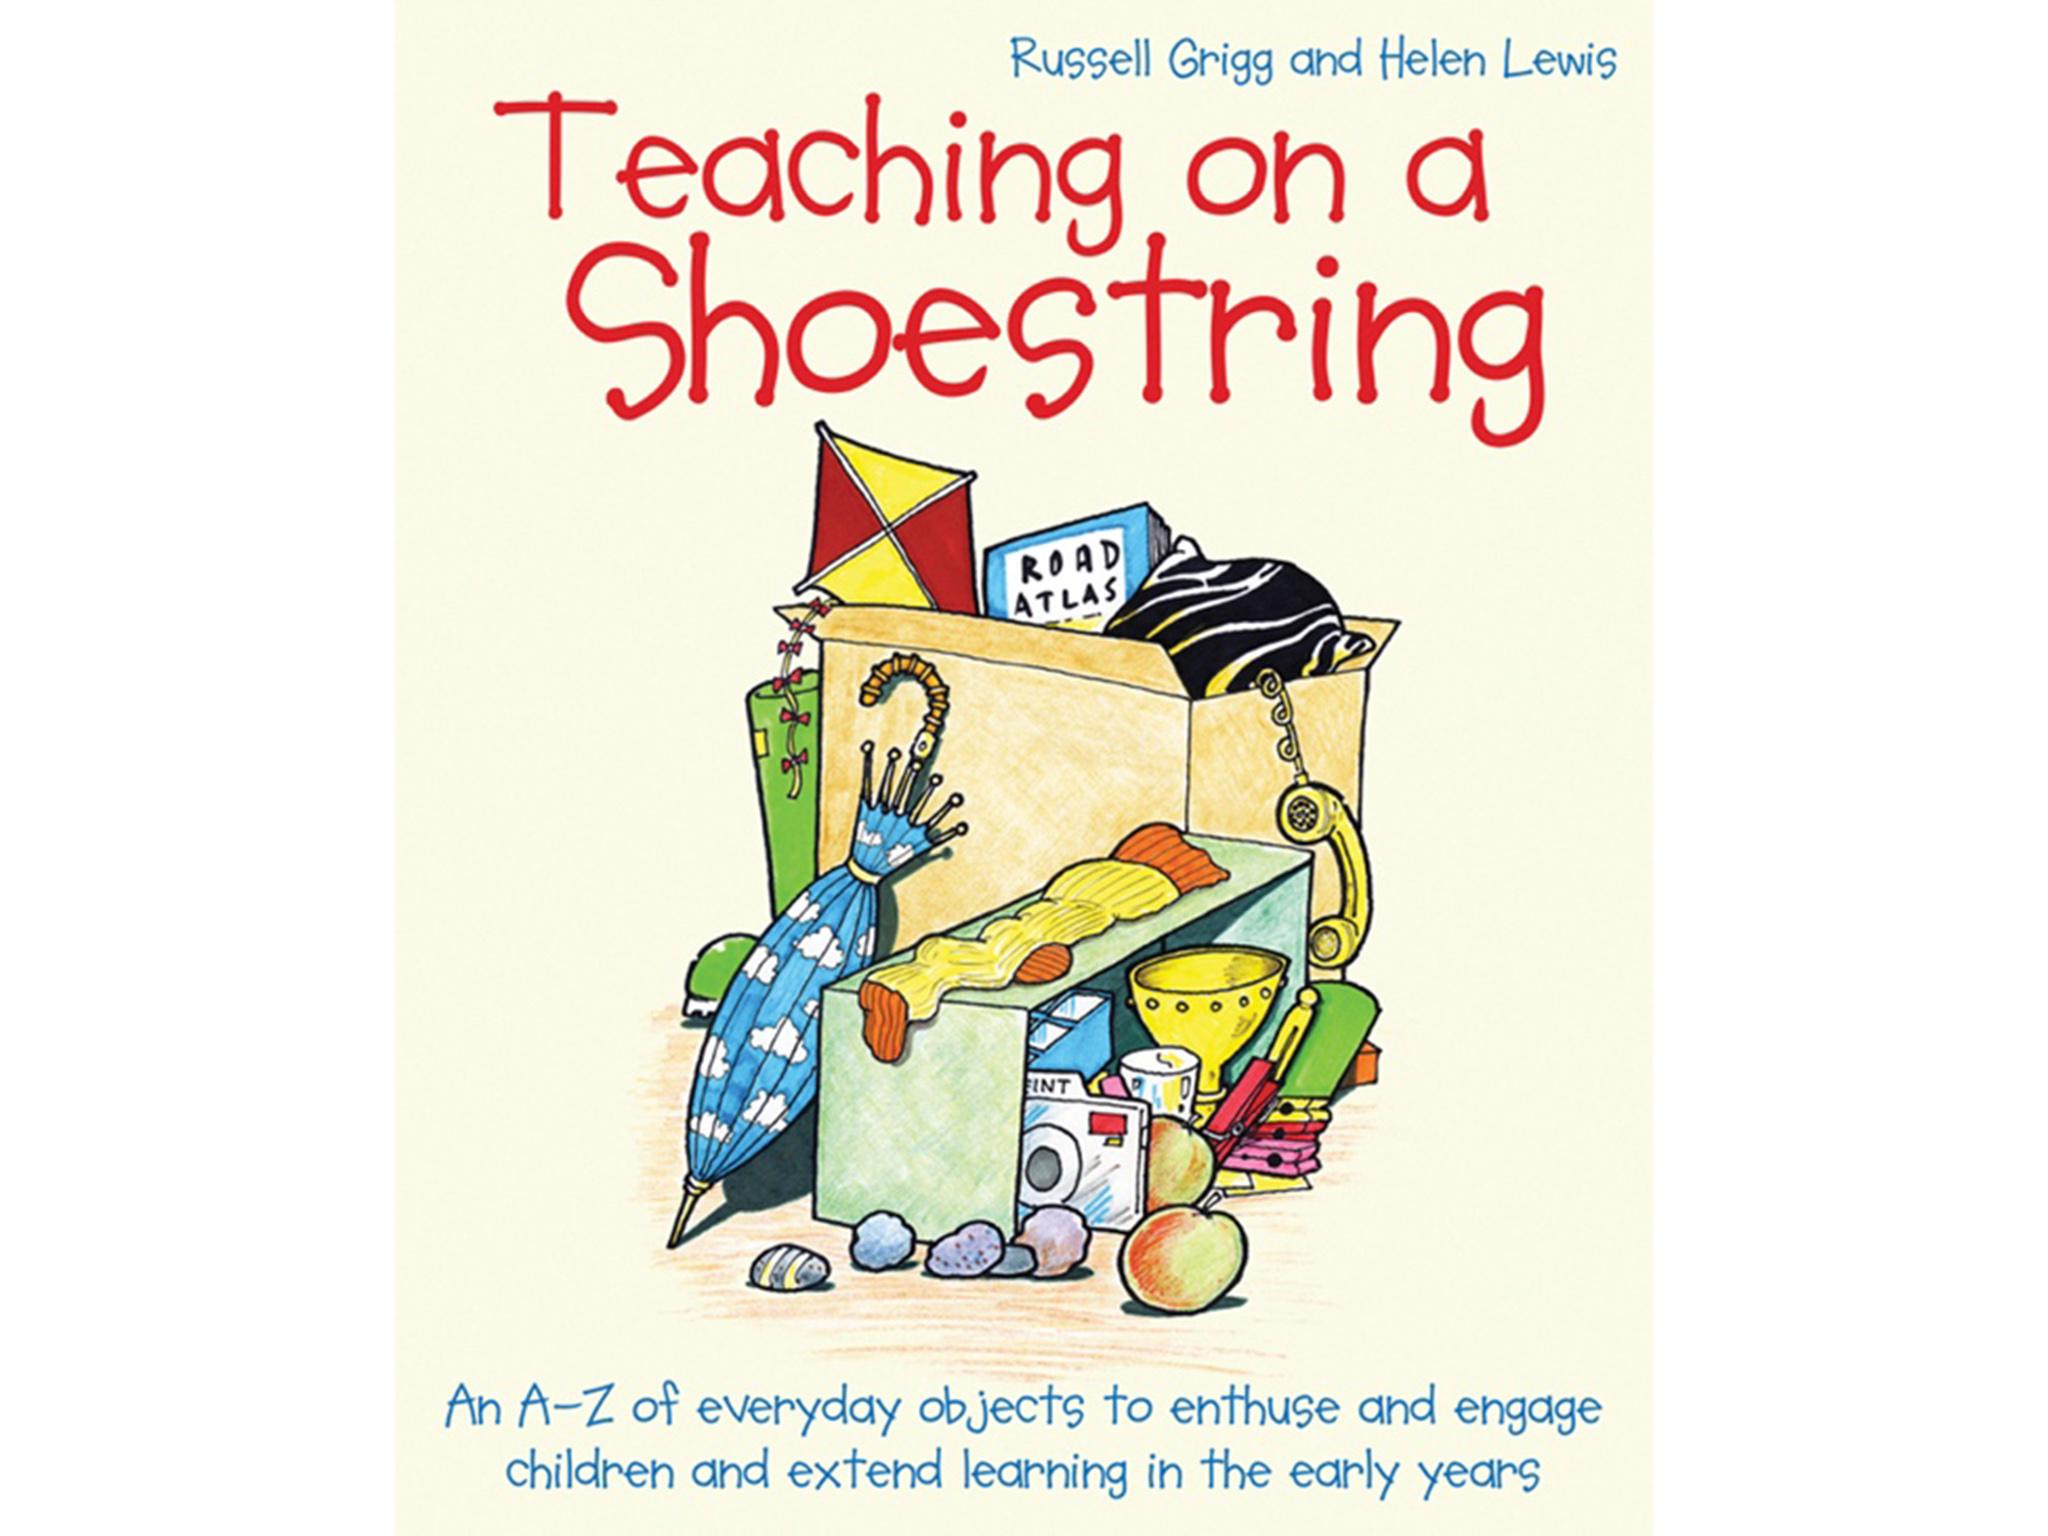 teaching-on-a-shoestring-homeschooling-books-indybest.jpg